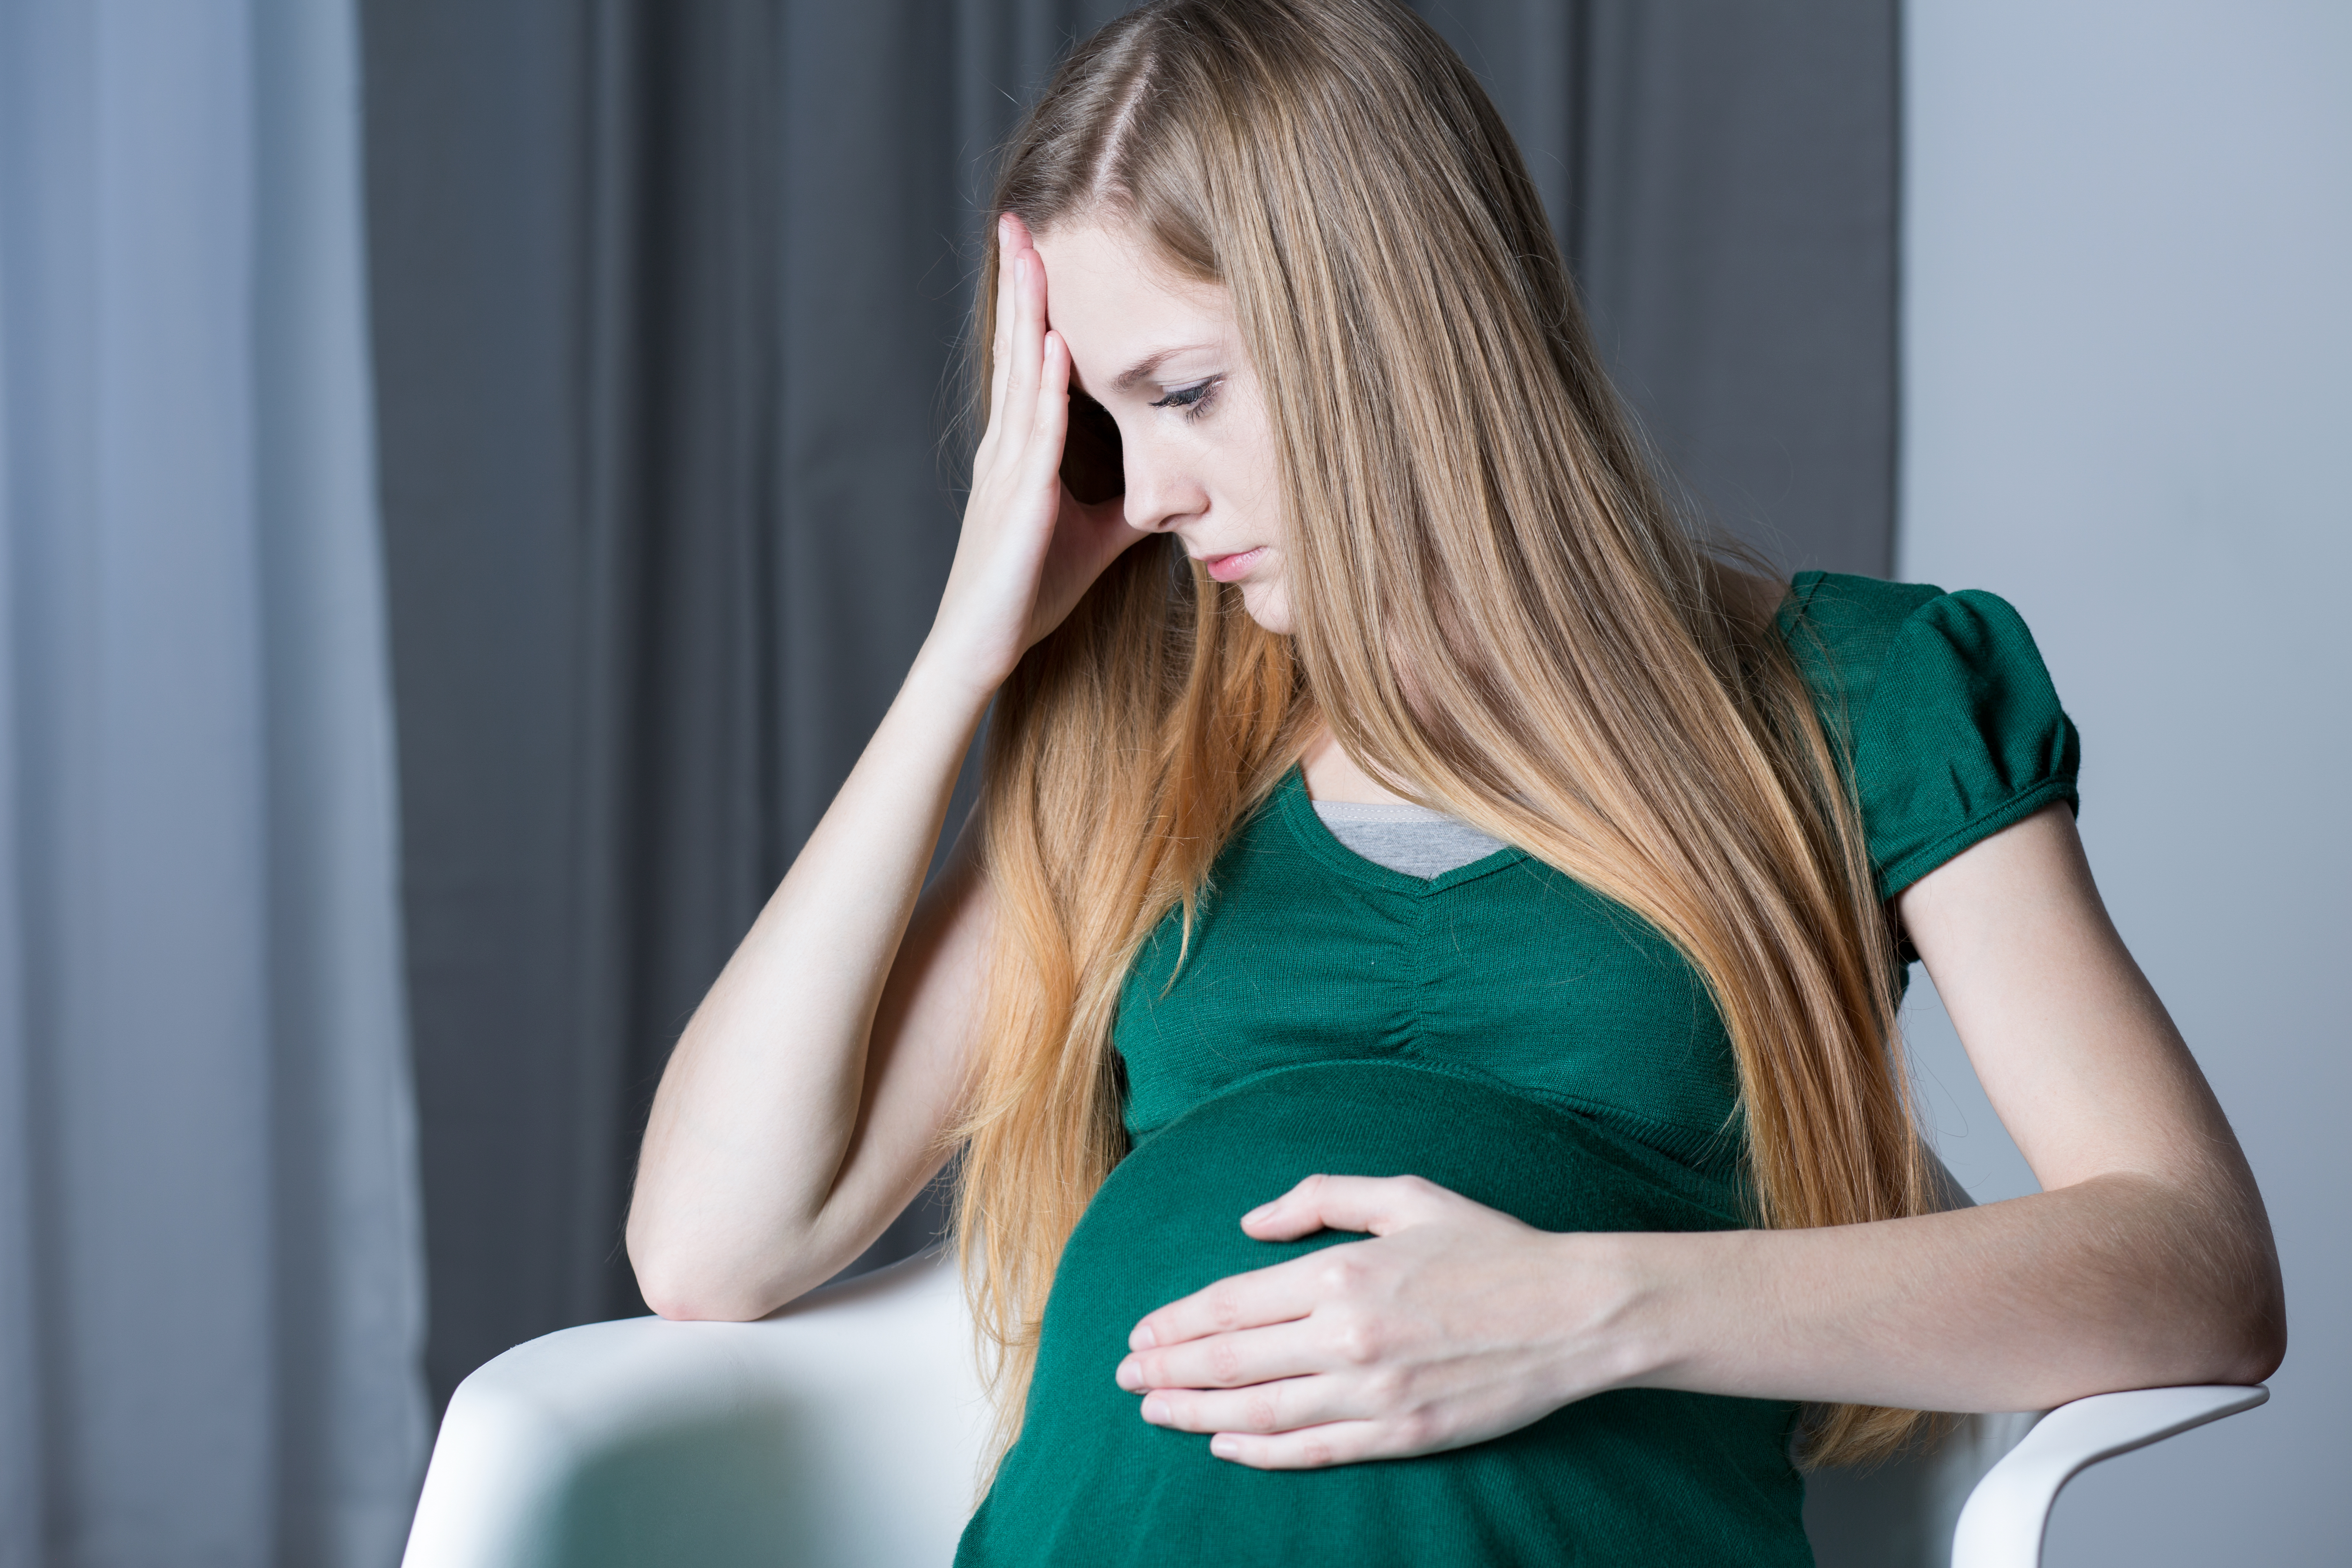 A frustrated pregnant teen | Source: Getty Images